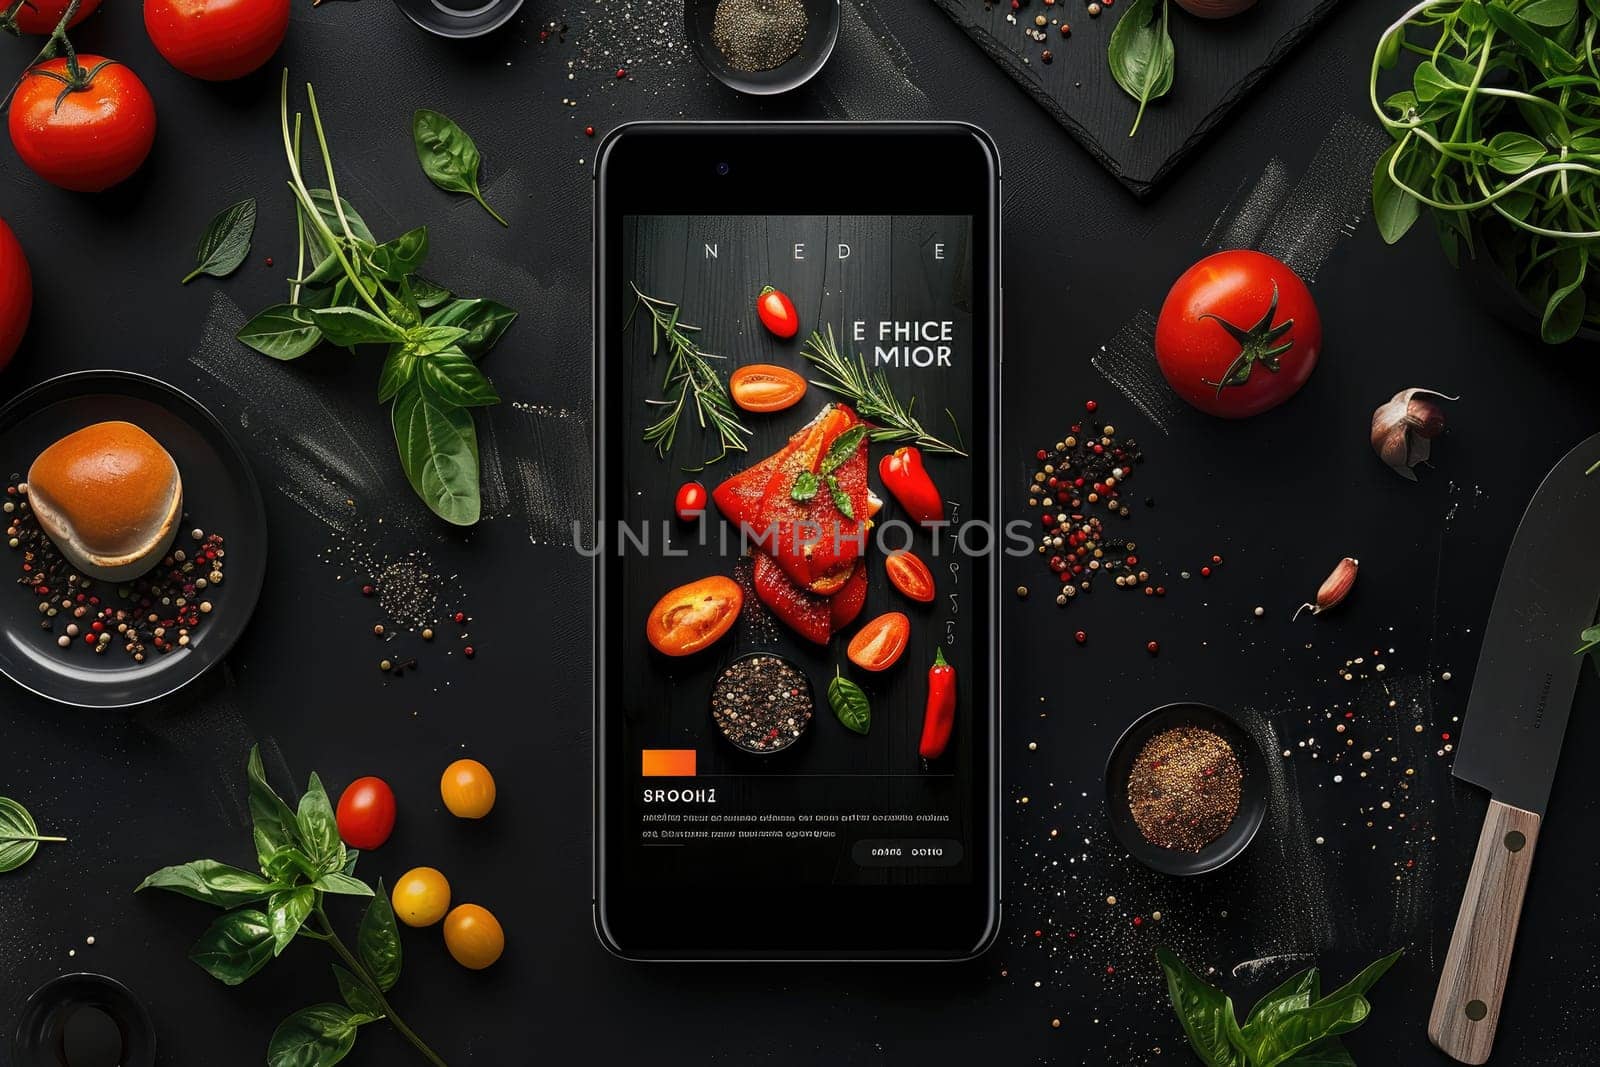 UI Application design for food school, dynaic, black, white, orange and red colors. by Chawagen